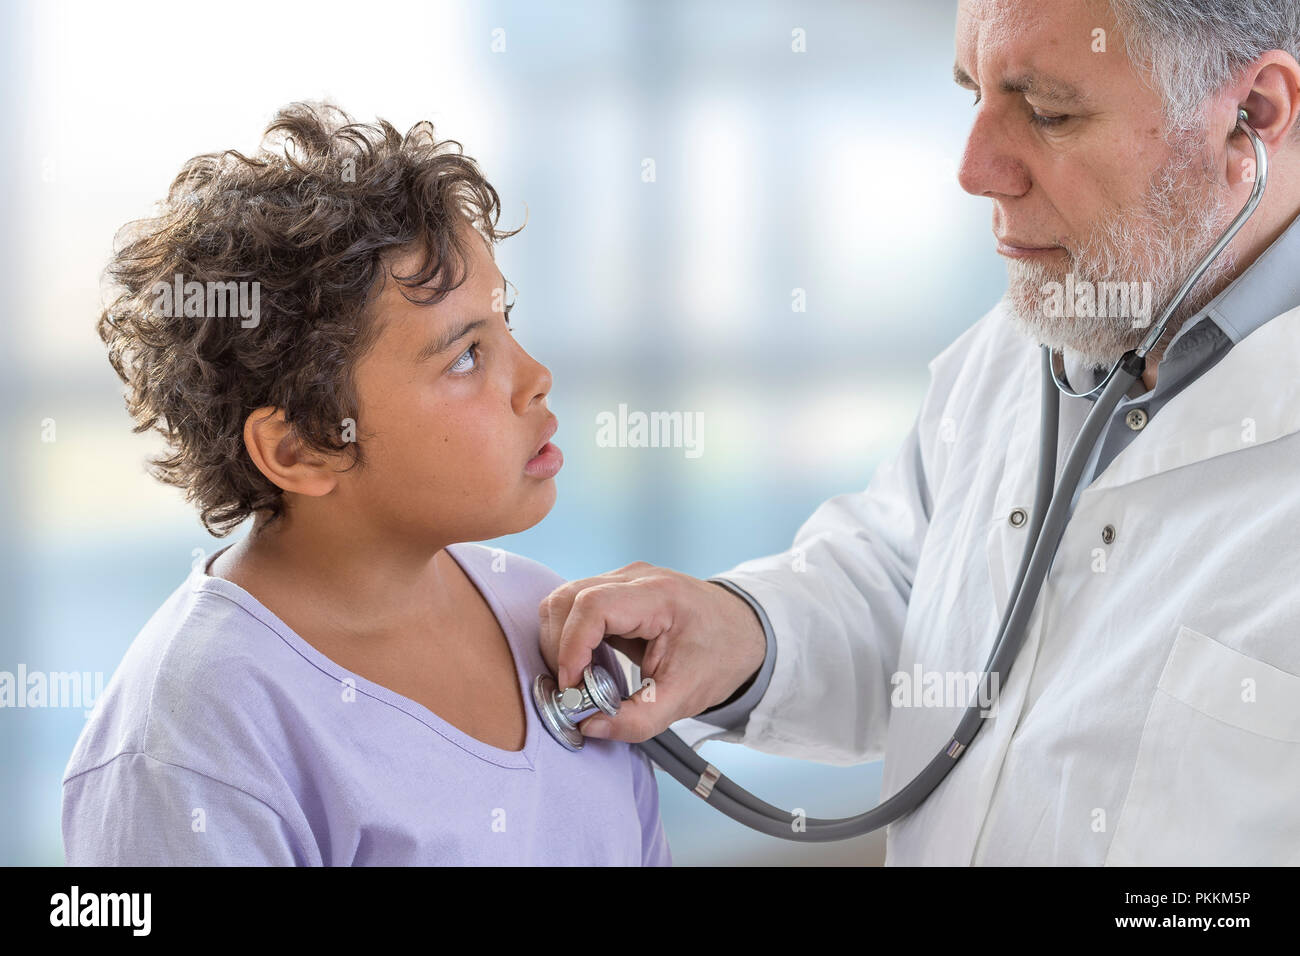 Young Teenage Check Up. Doctor Listens to Heart Rate with Stethoscope Stock Photo